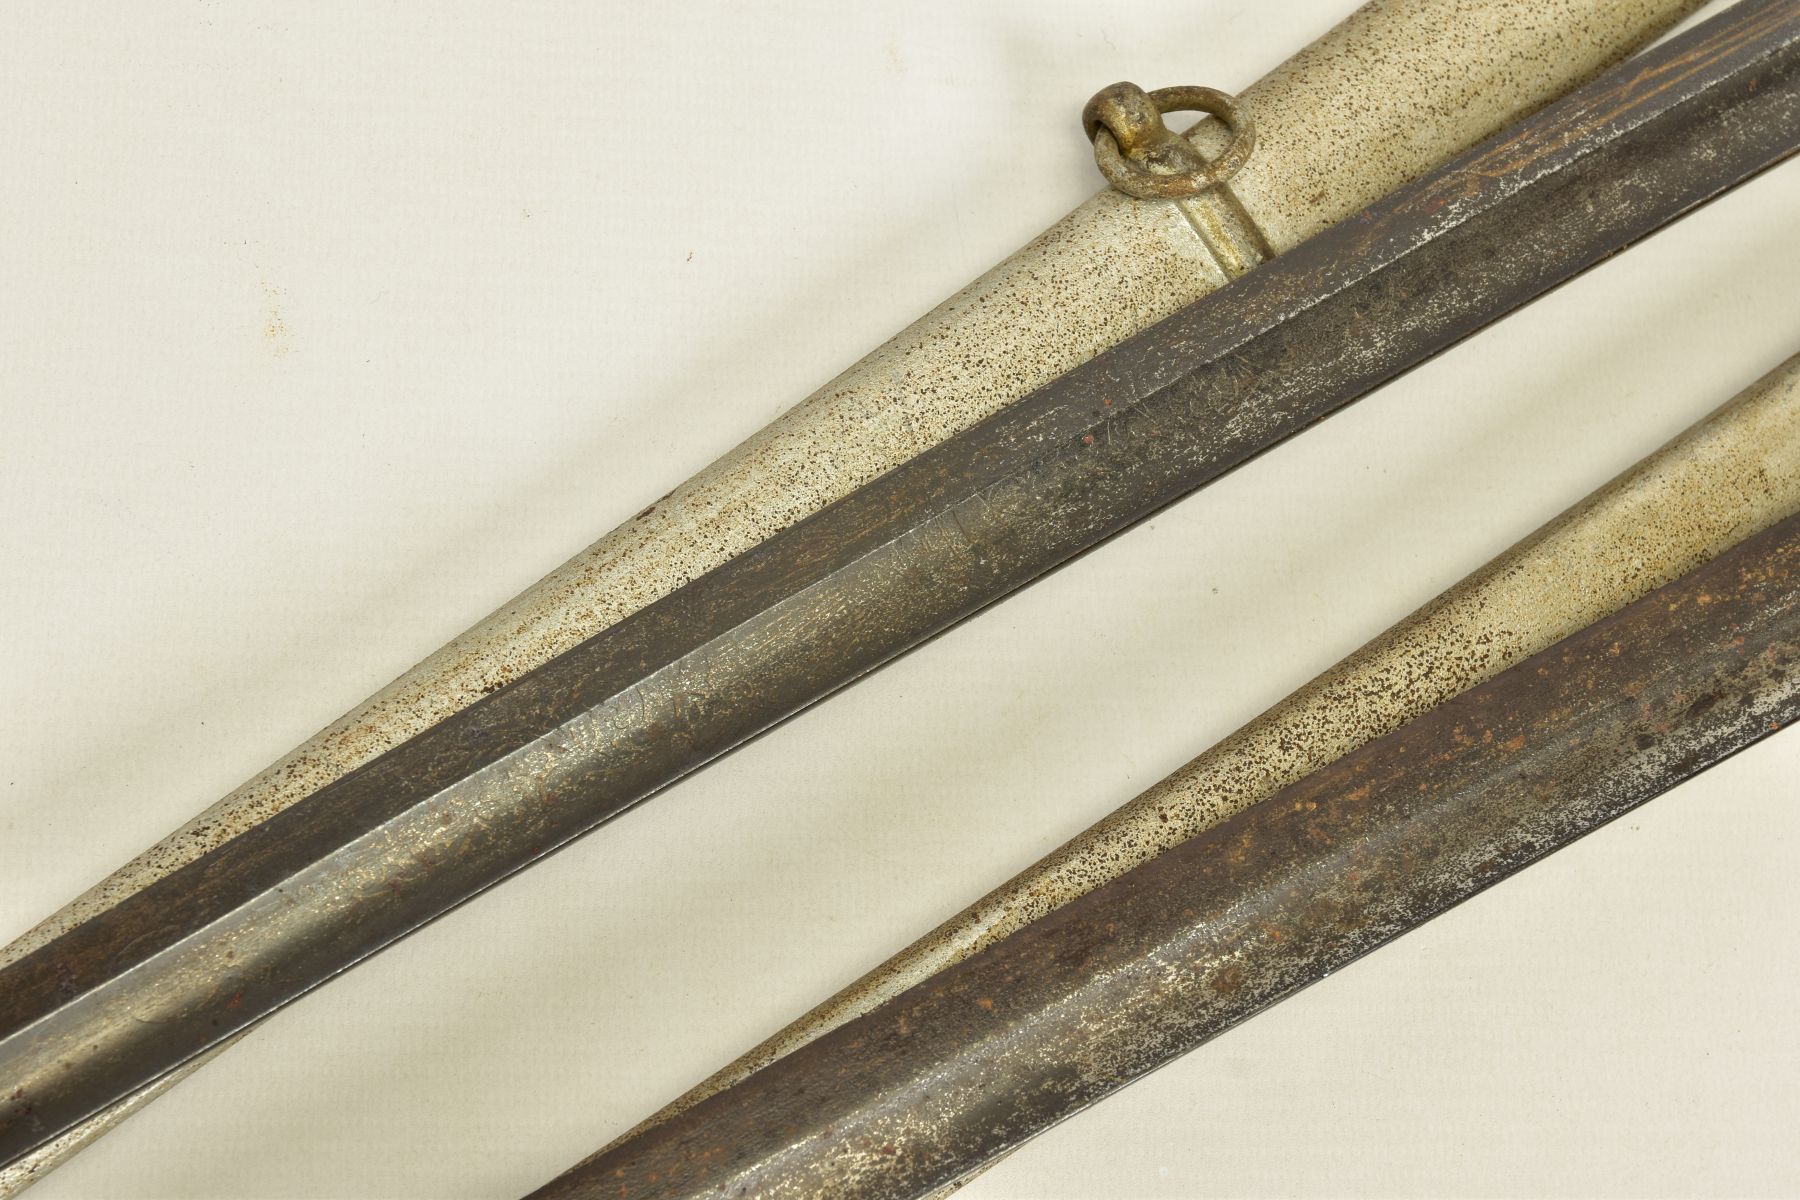 TWO x EXAMPLES OF 1945 PATTERN VICTORIAN INFANTRY SWORDS with metal scabbards, blade lengths - Image 13 of 14